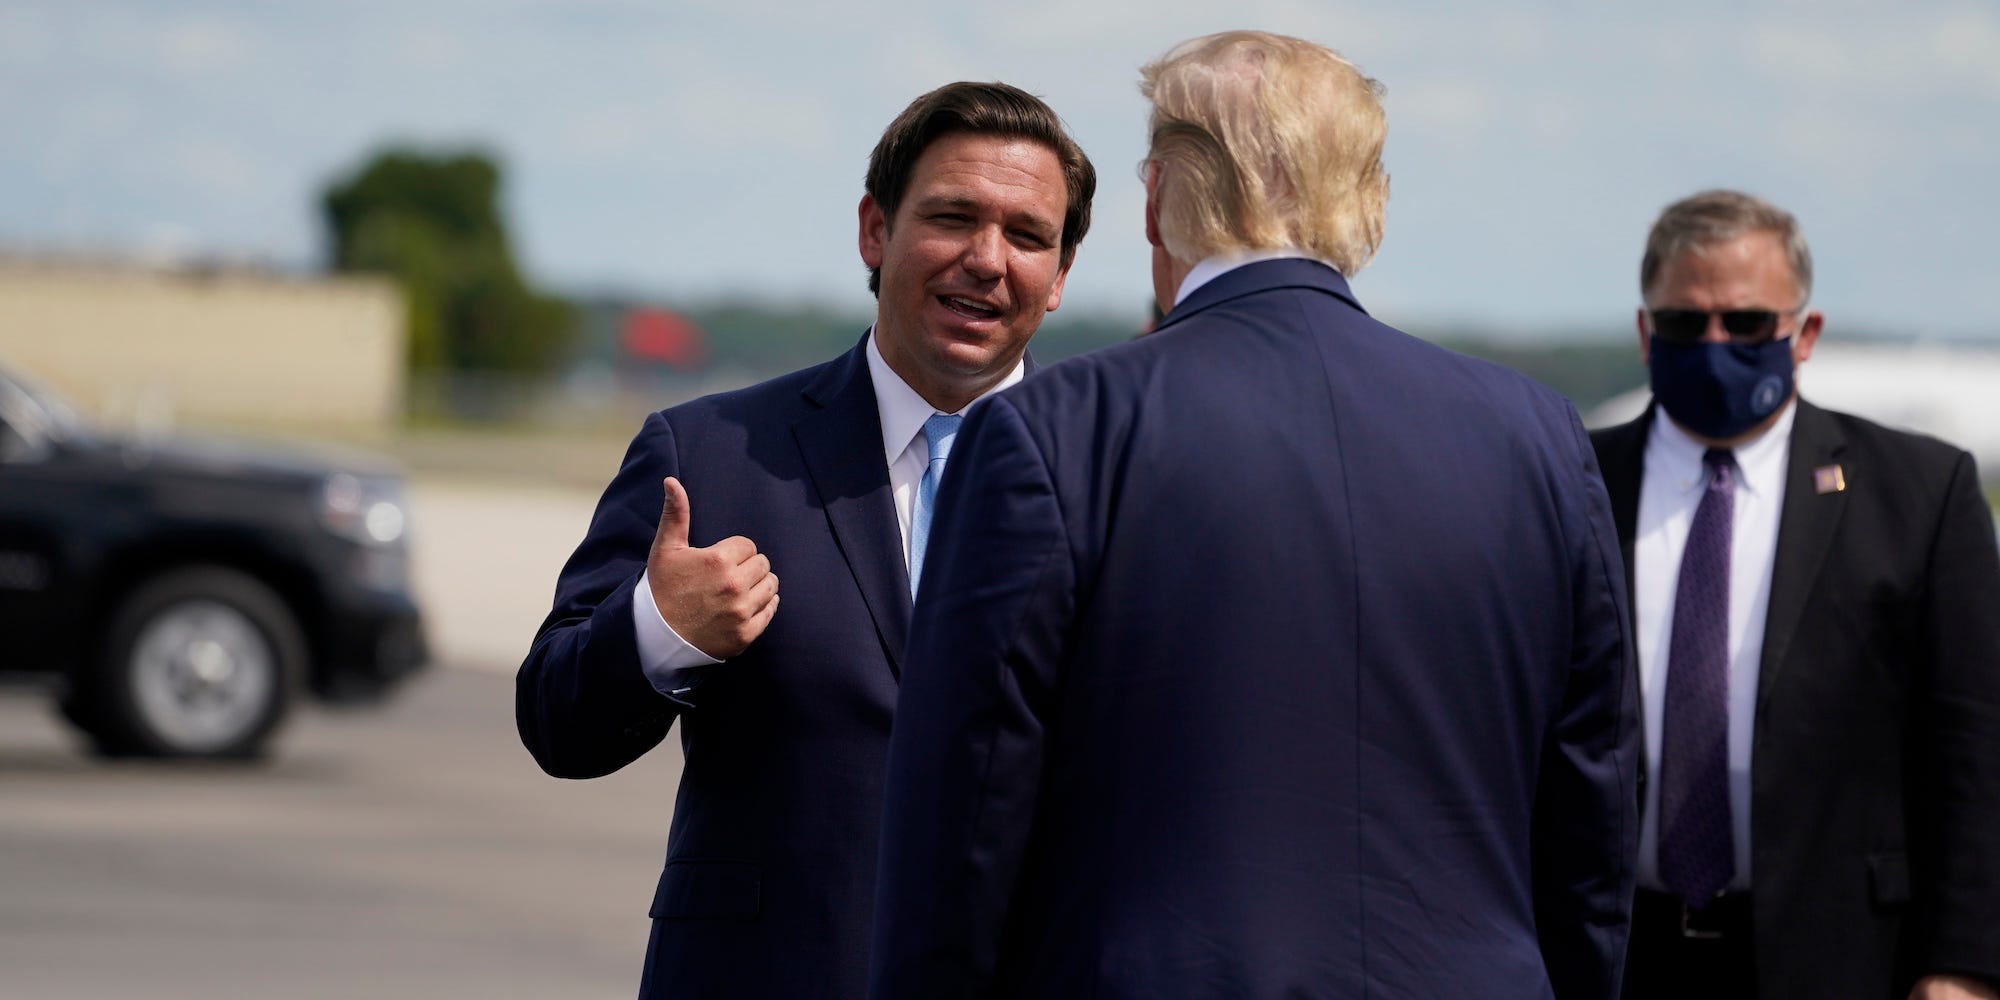 President Donald Trump speaks with Florida Gov. Ron DeSantis as he arrives at Southwest Florida International Airport, Friday, Oct. 16, 2020, in Fort Myers, Fla.